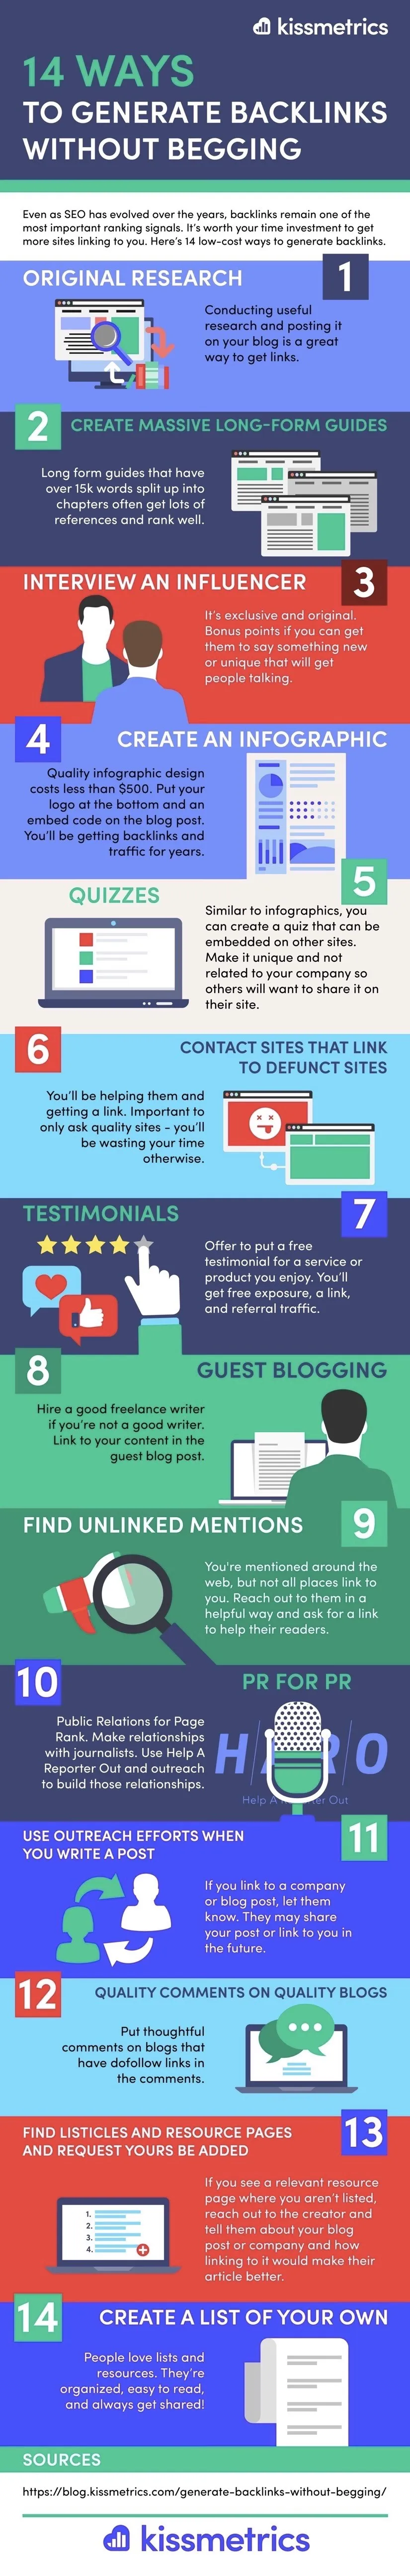 14 Ways to Get Backlinks Without Begging - #infographic